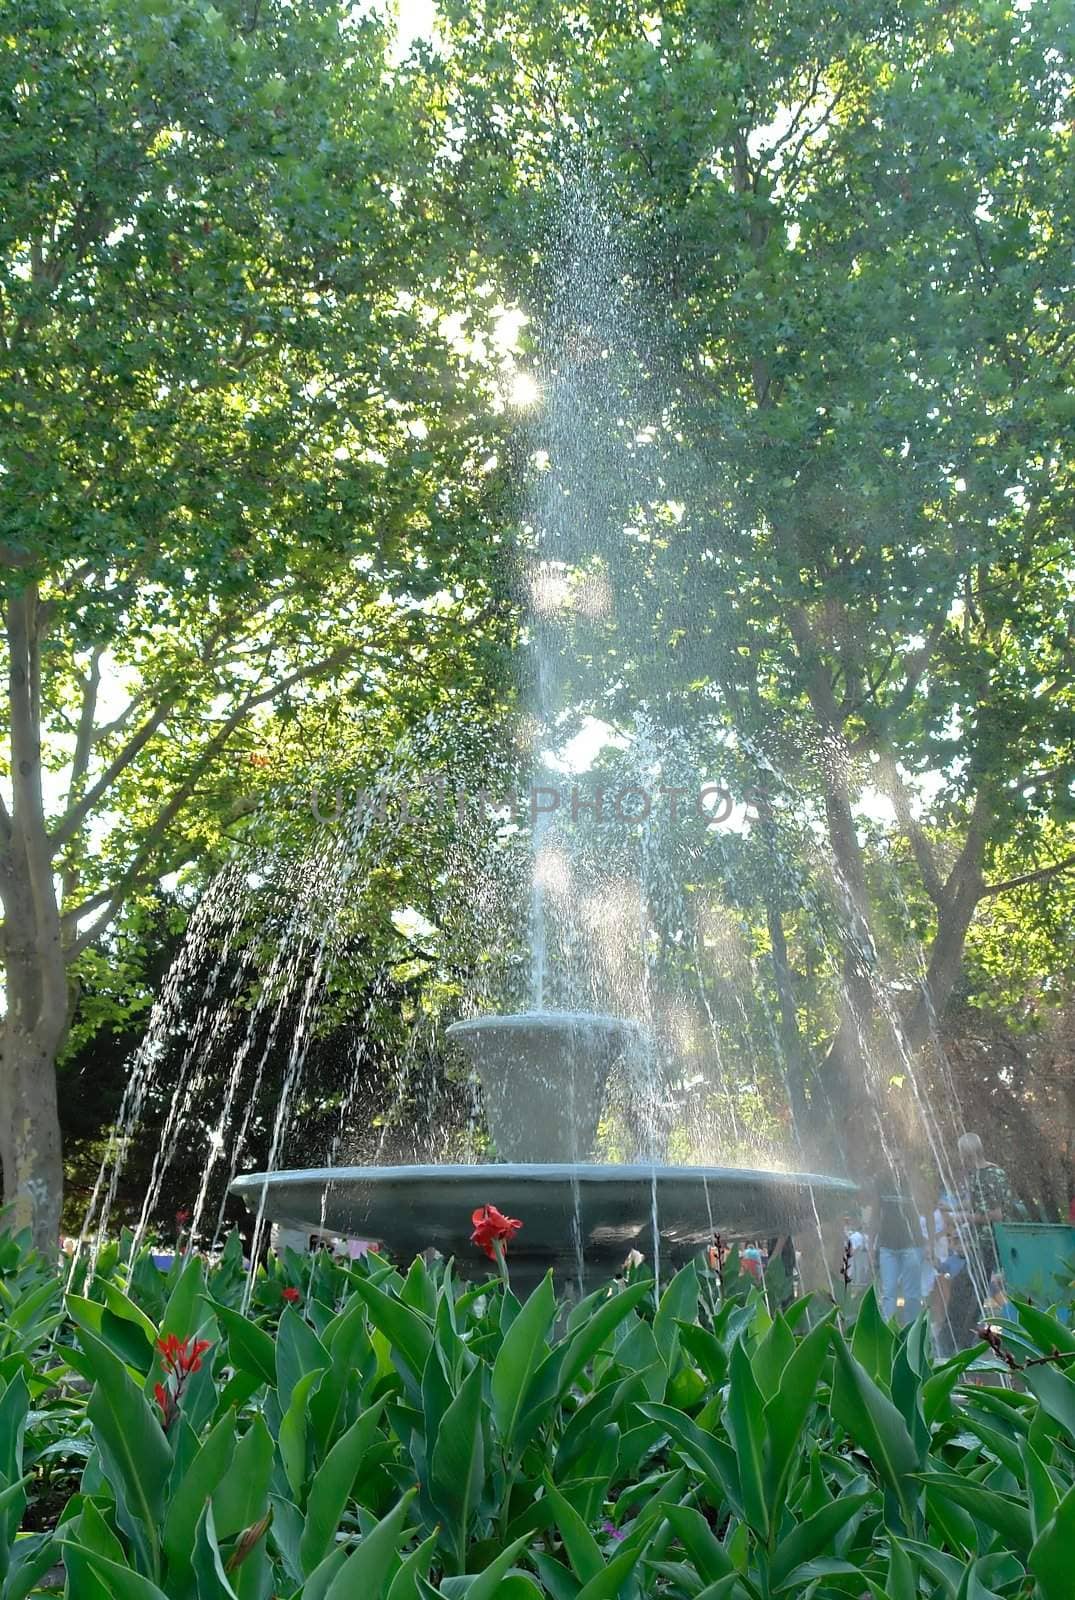 A small fountain in the summer park